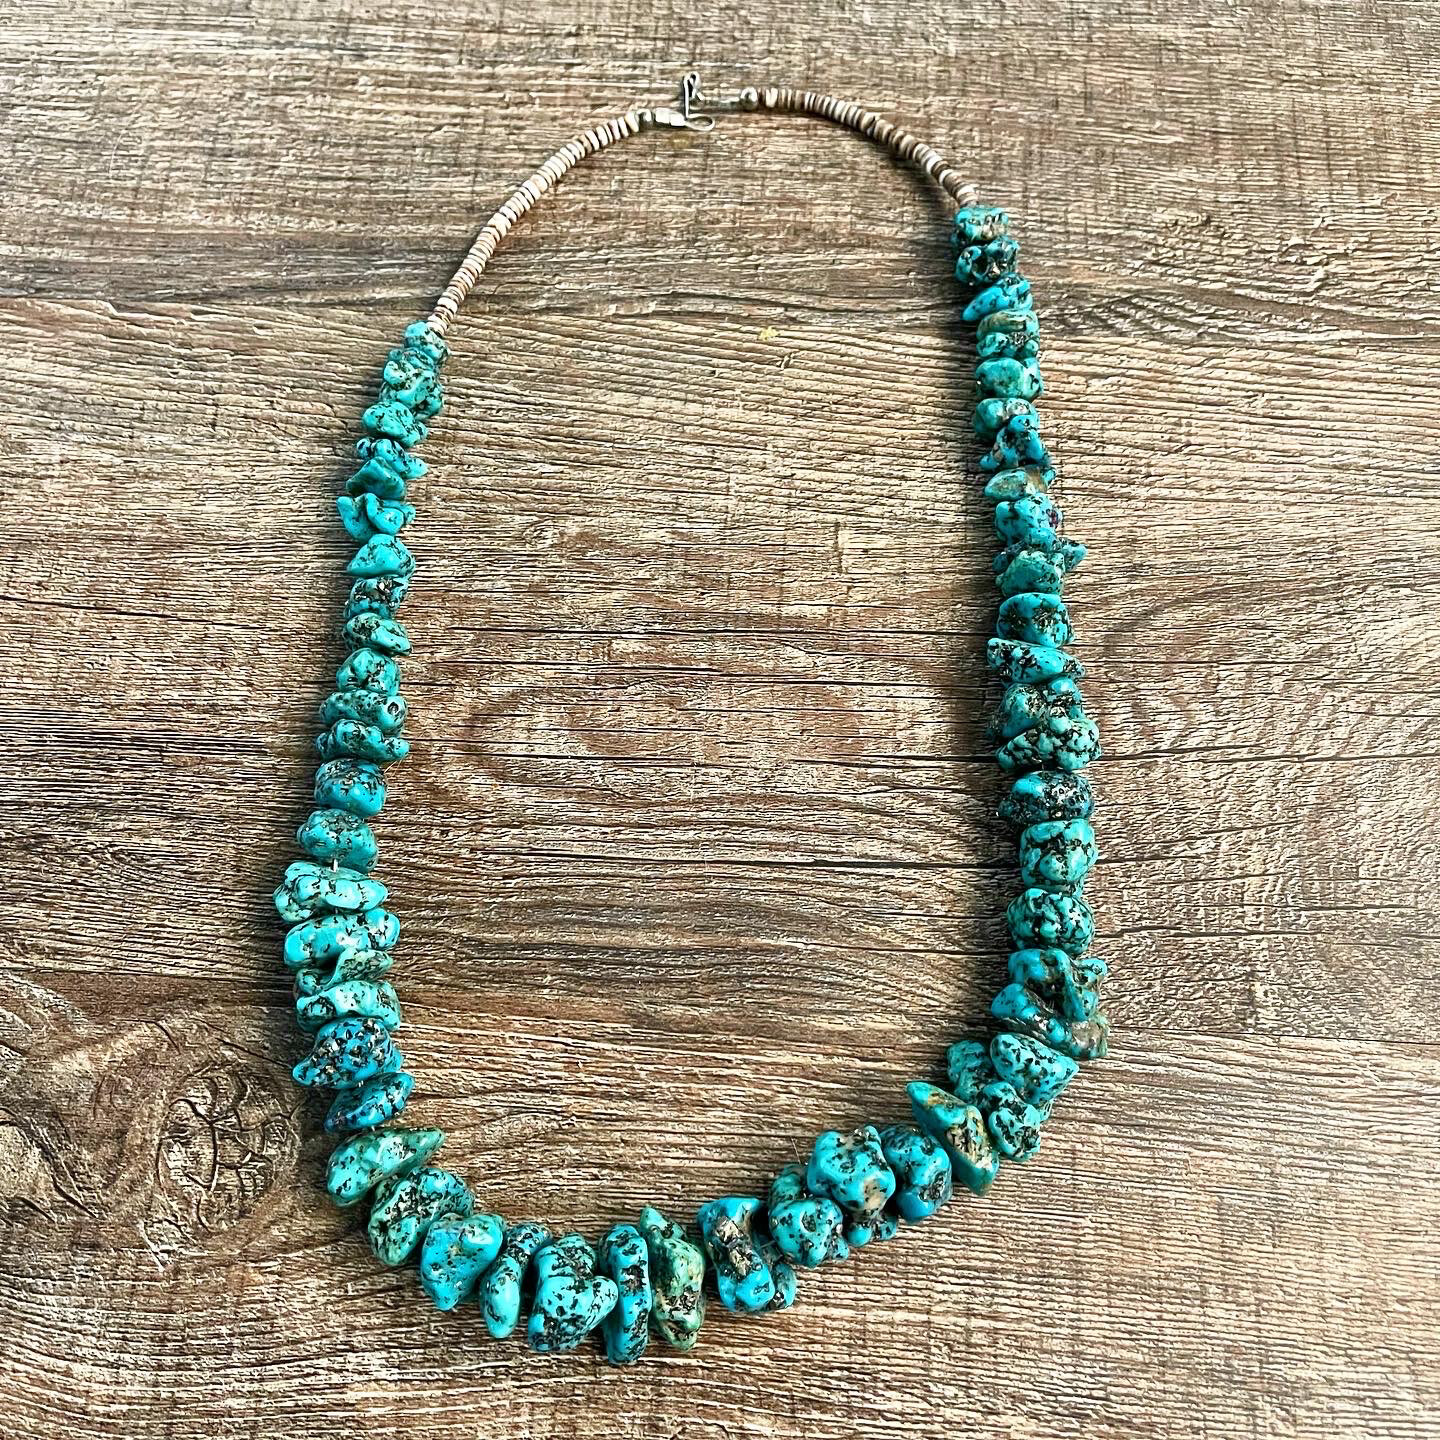 Vintage Turquoise Natural Stone Necklace. Free Shipping